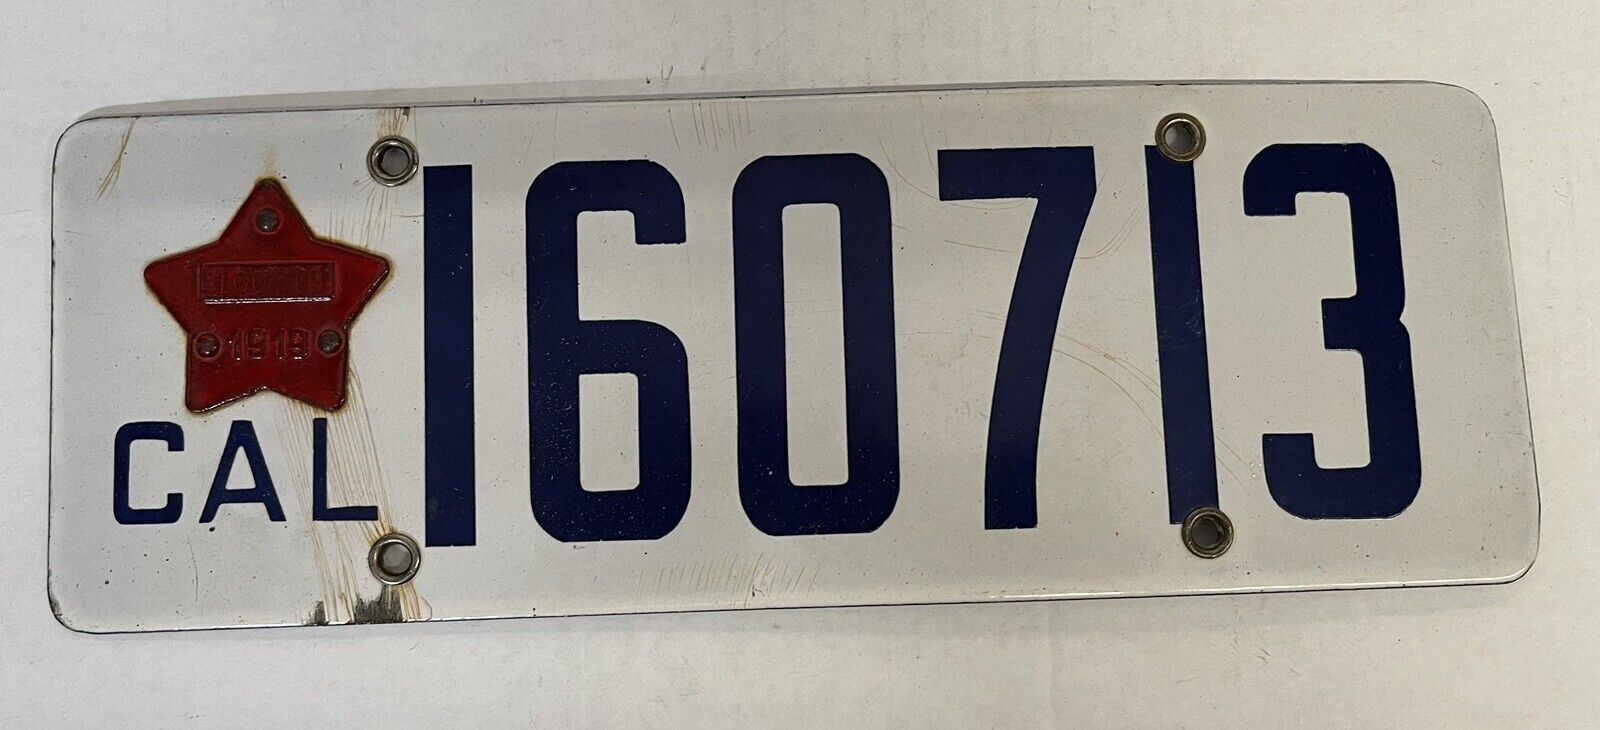 1919 California Porcelain License Plate w/Matching 1919 Star Tab #160713 Number